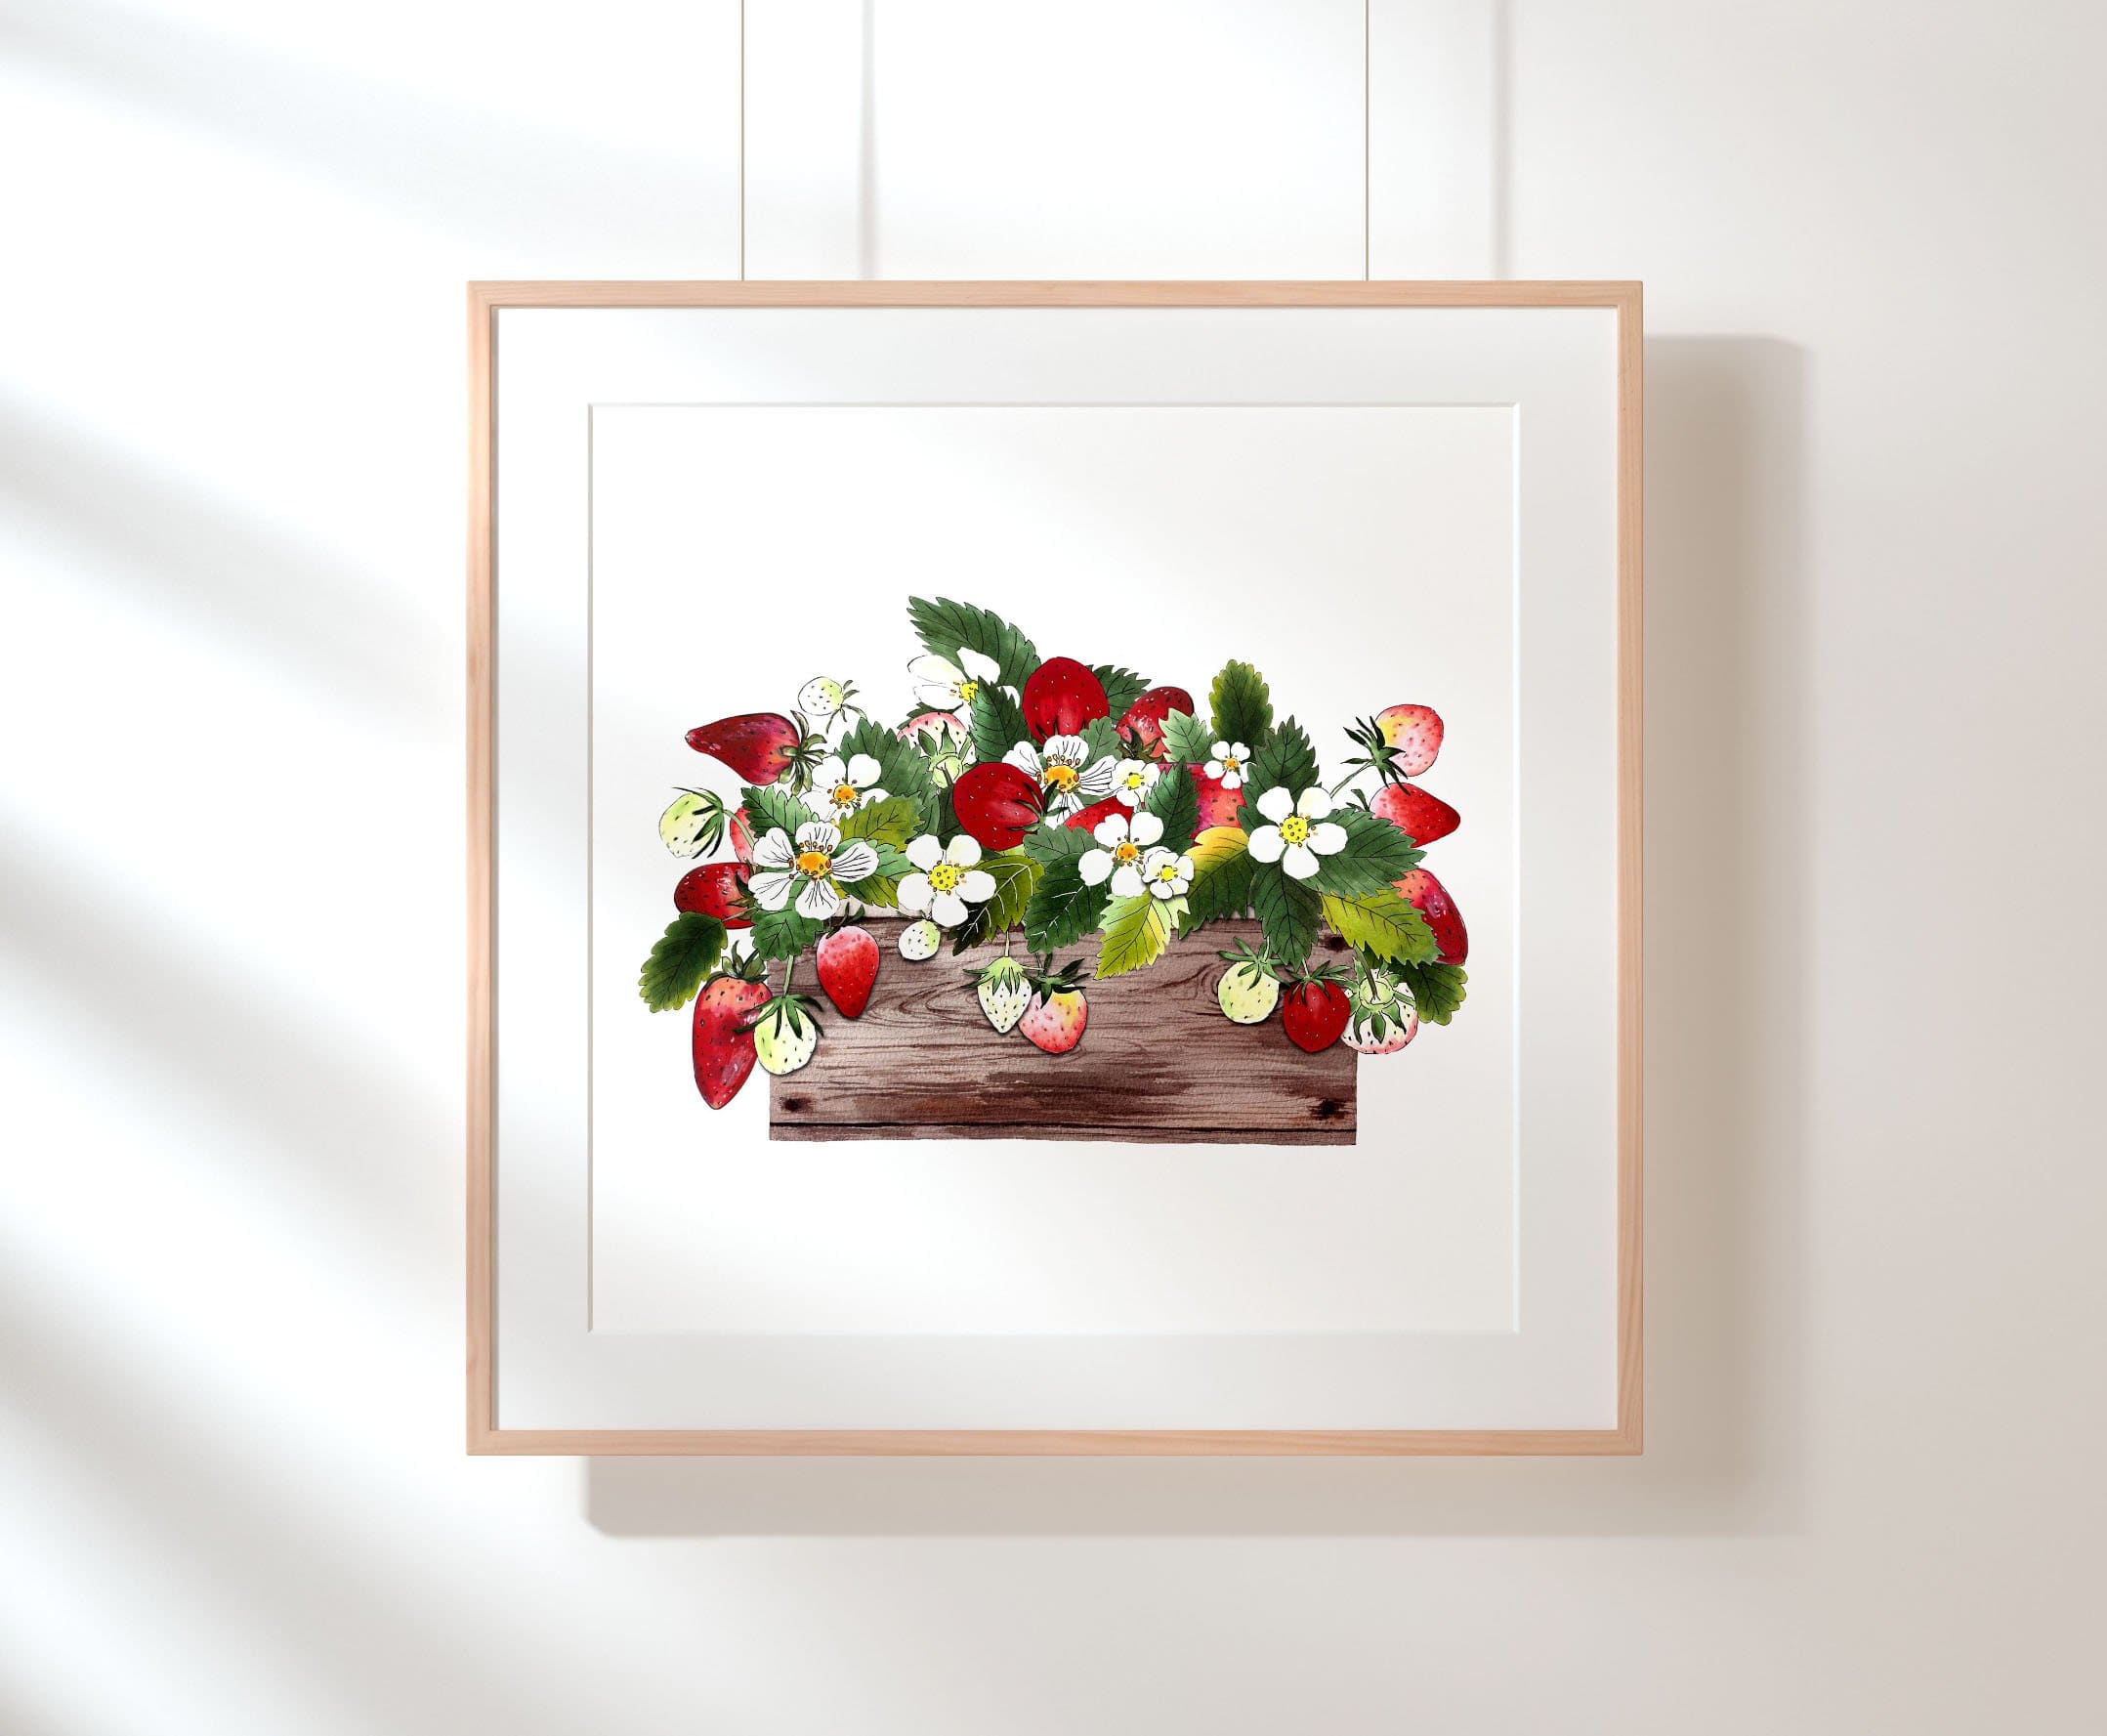 A picture with a wooden frame and a white background on which a box of strawberries is drawn.